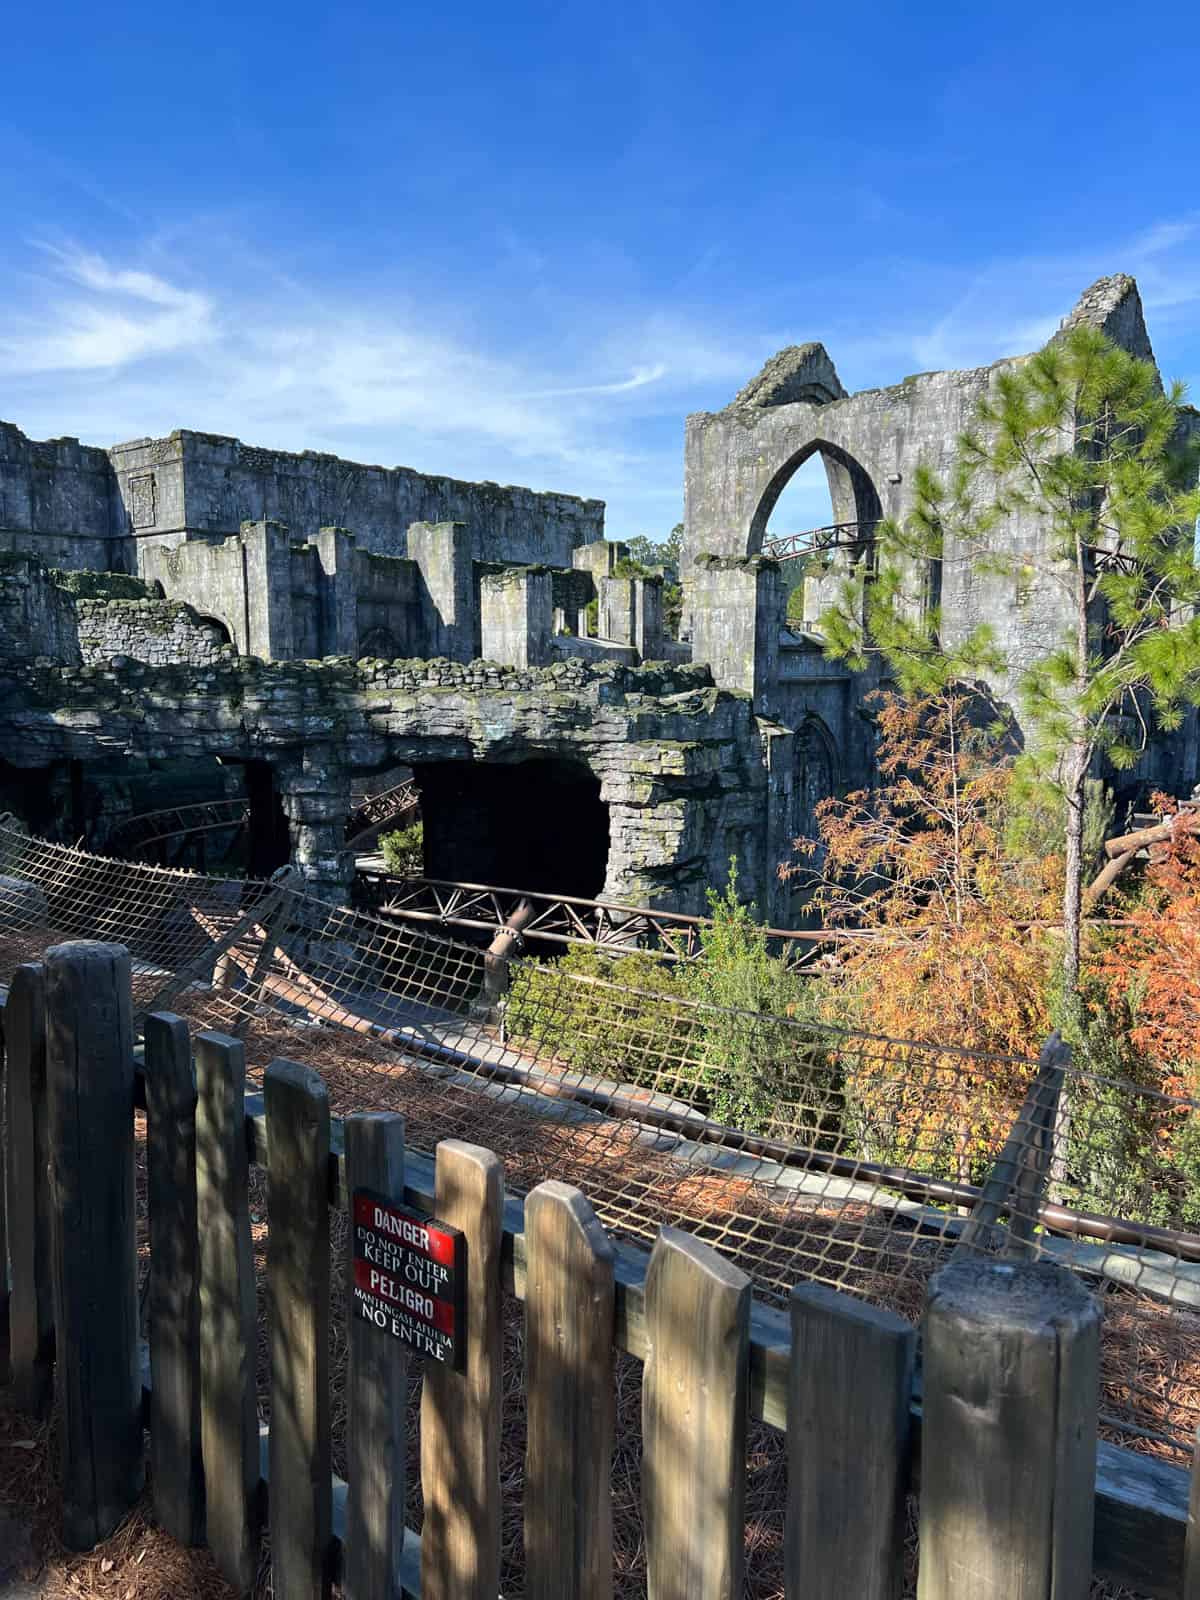 An image of Hagrid's Motorbike Ride at Harry Potter World.